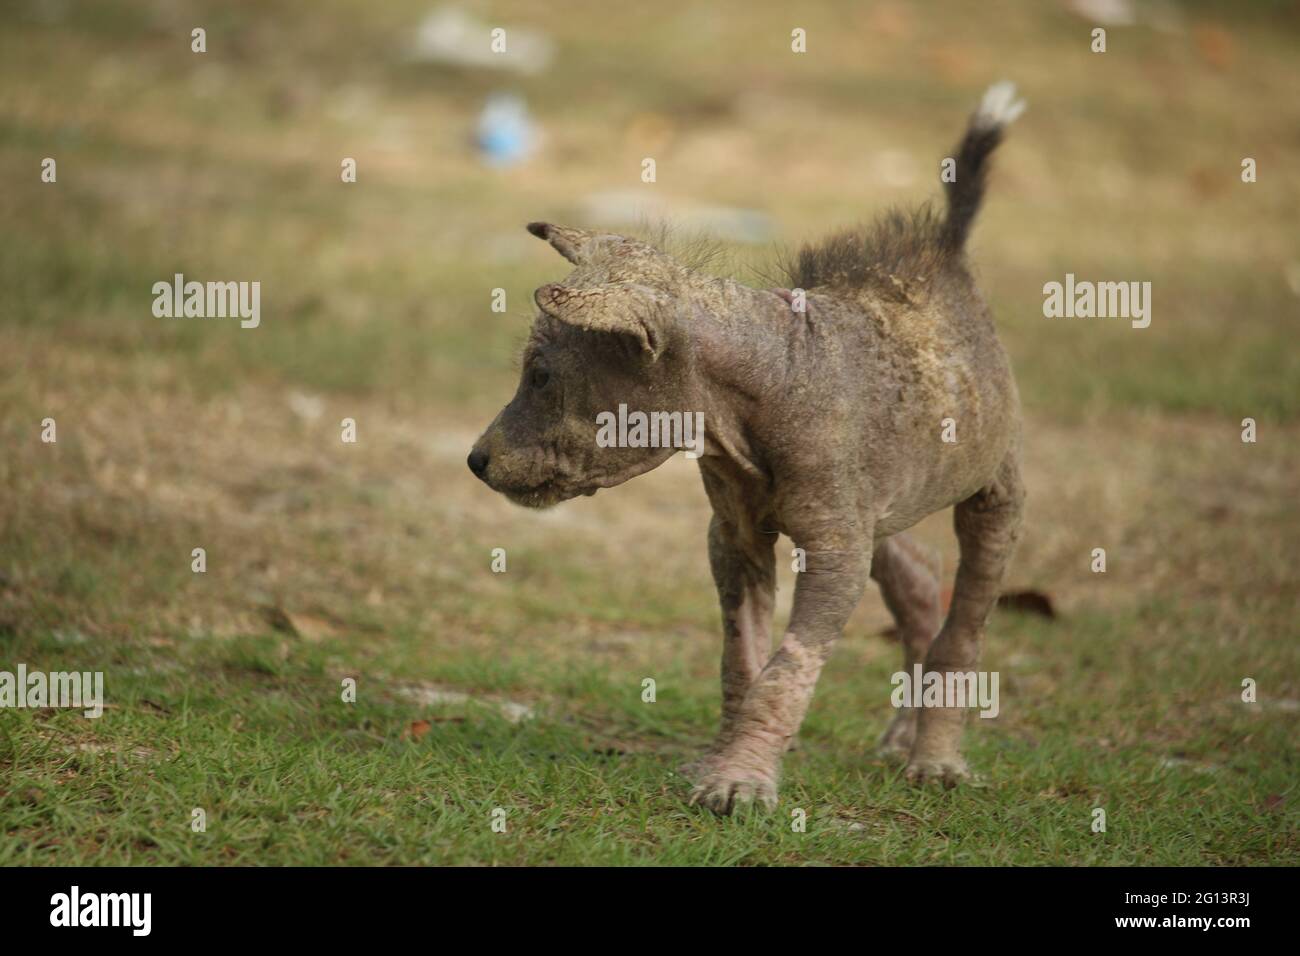 A puppy suffering from skin disease is walking Stock Photo